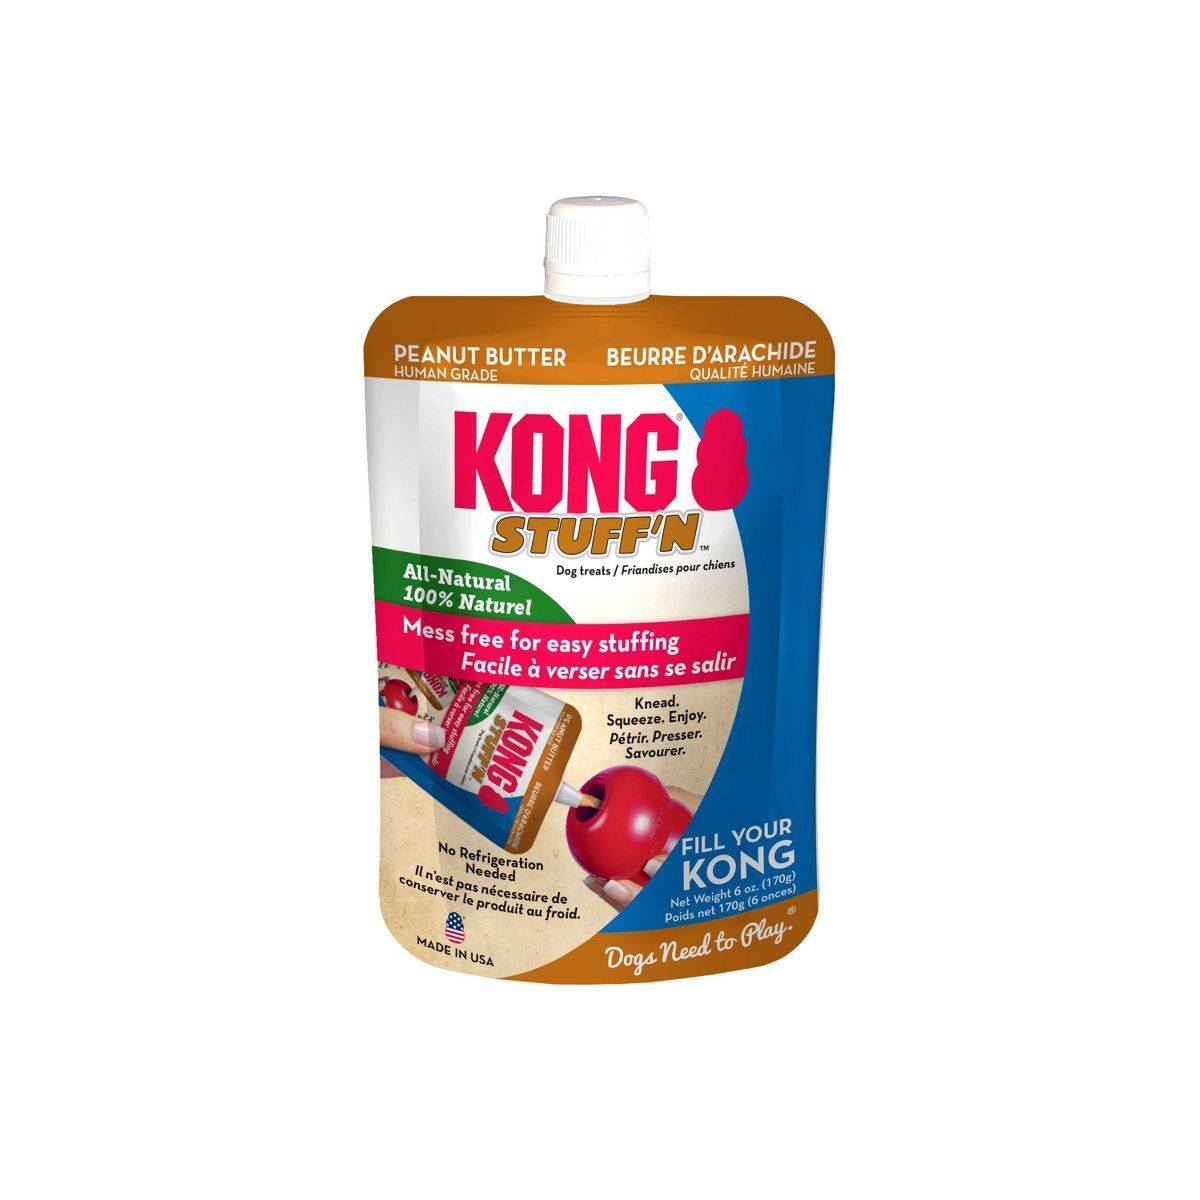 KONG Stuff'n All-Natural Peanut Butter for Dogs - 6oz | Target